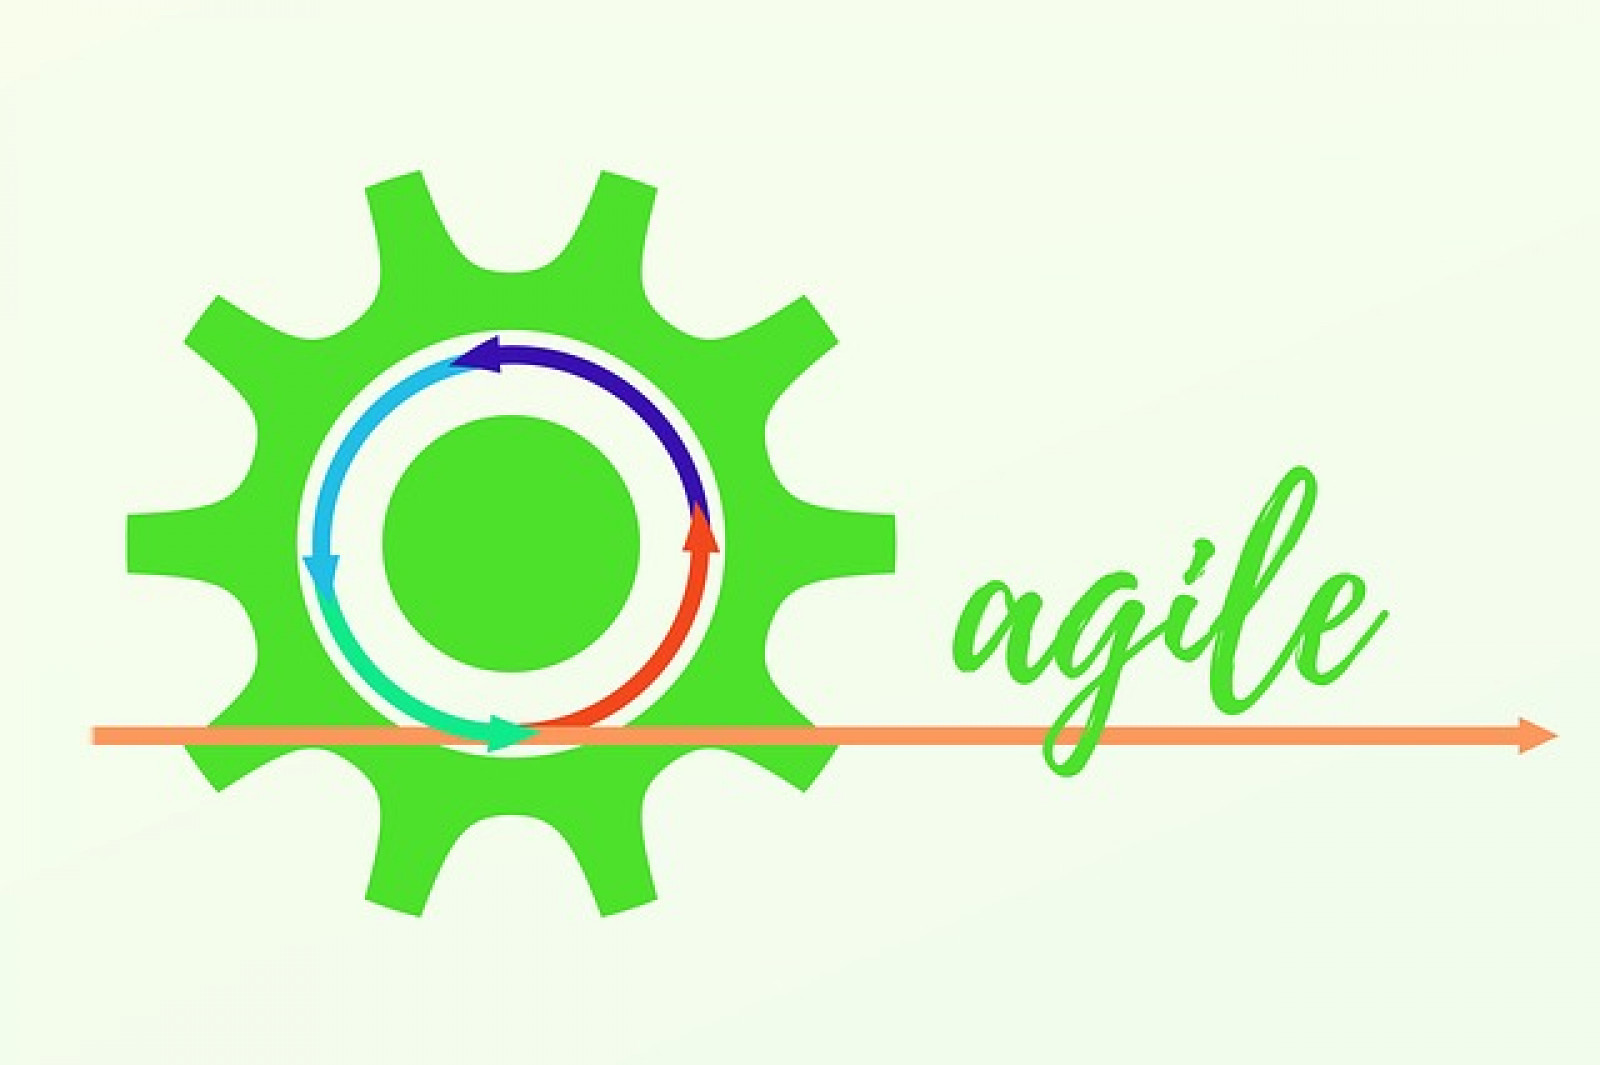 Agile manufacturing to keep up with the market!